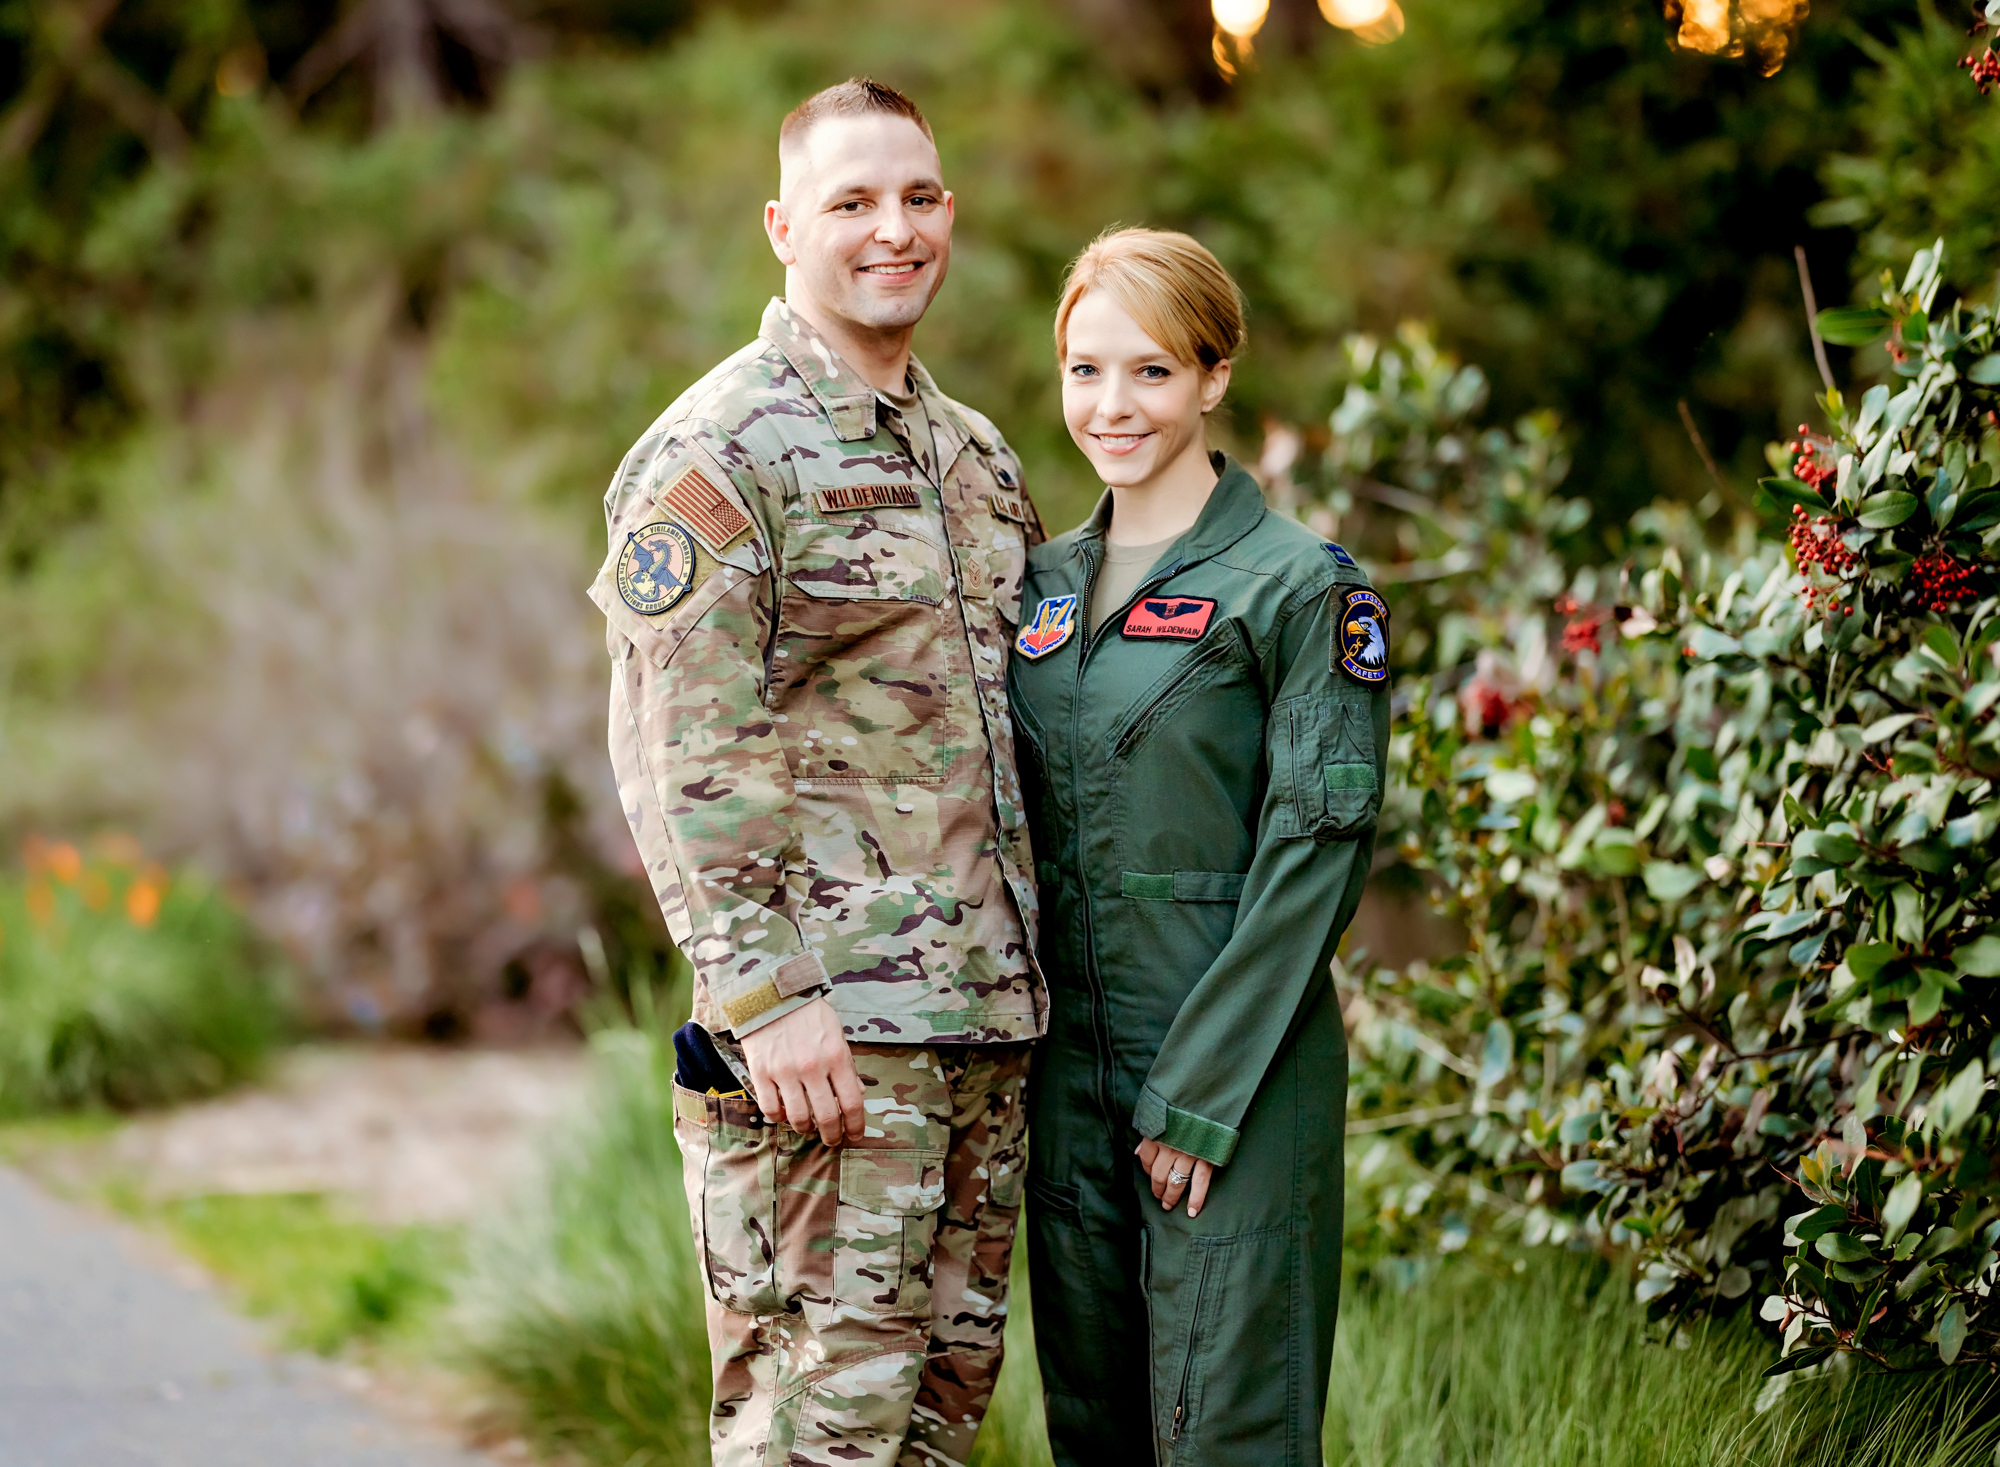 A Tribute to Military Couples